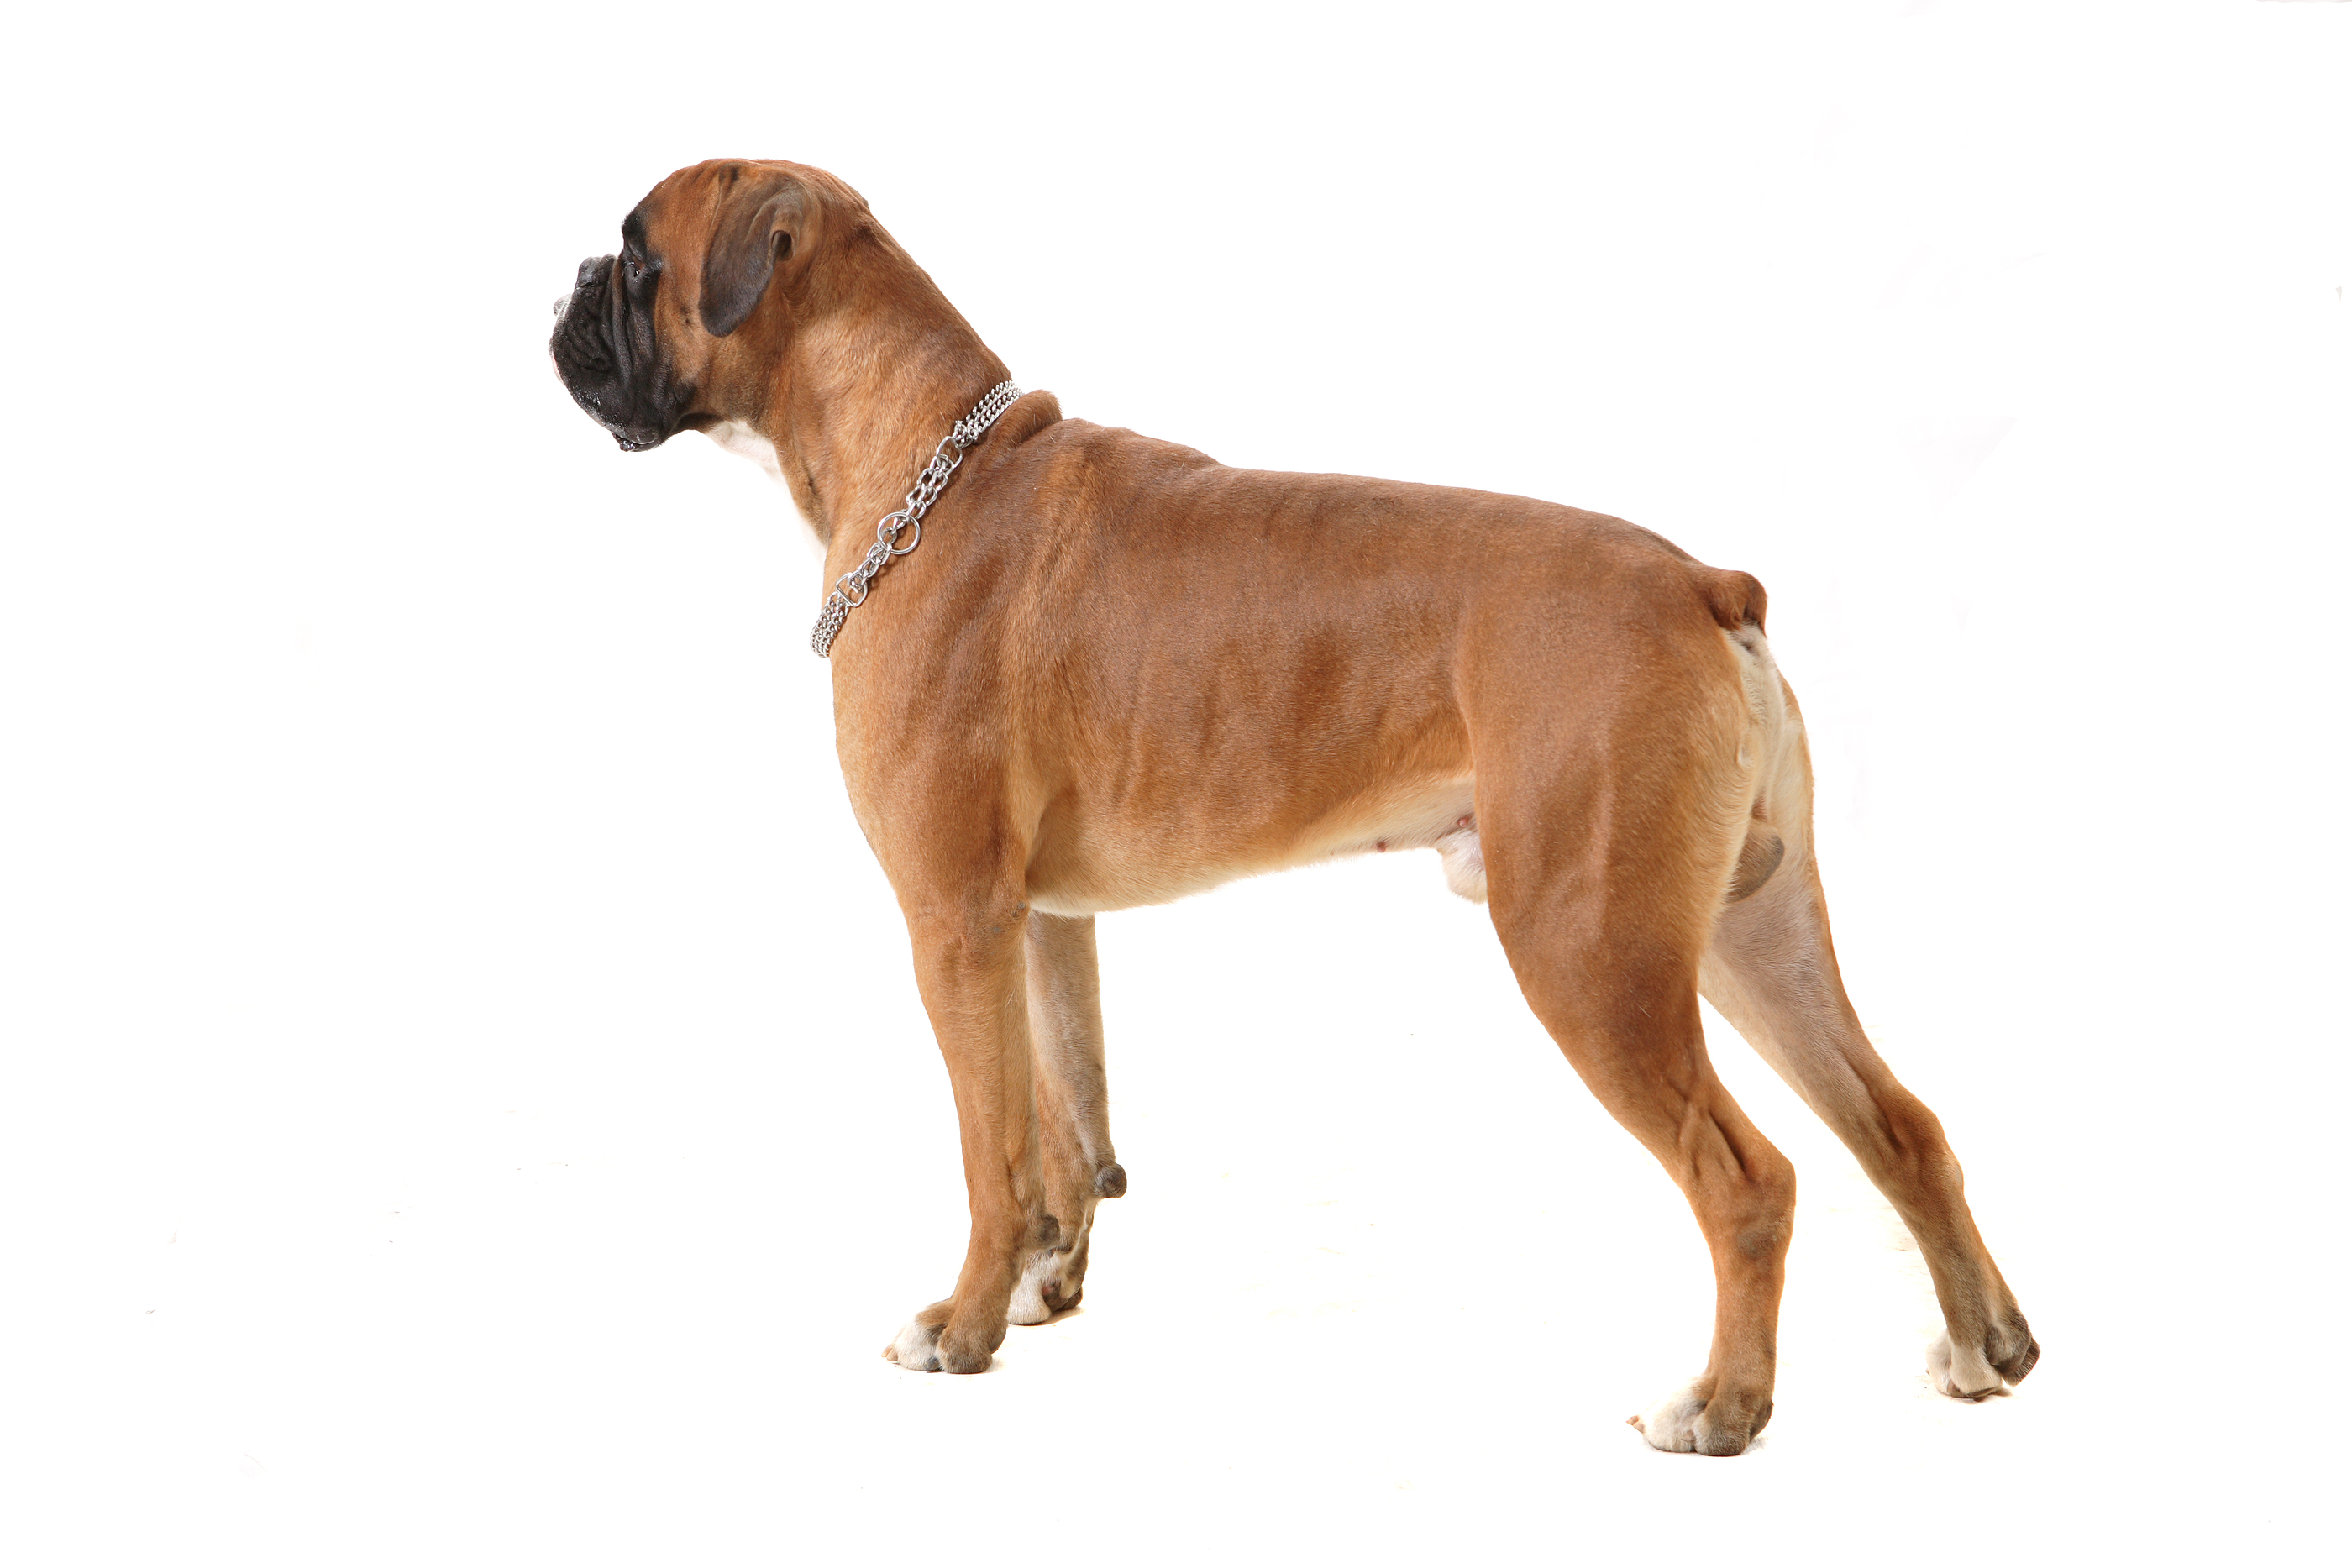 Boxer Dog Photo | Boxer Dog Wallpapper Hd Download | Wallpicshd - Images Of Dogs, Transparent background PNG HD thumbnail